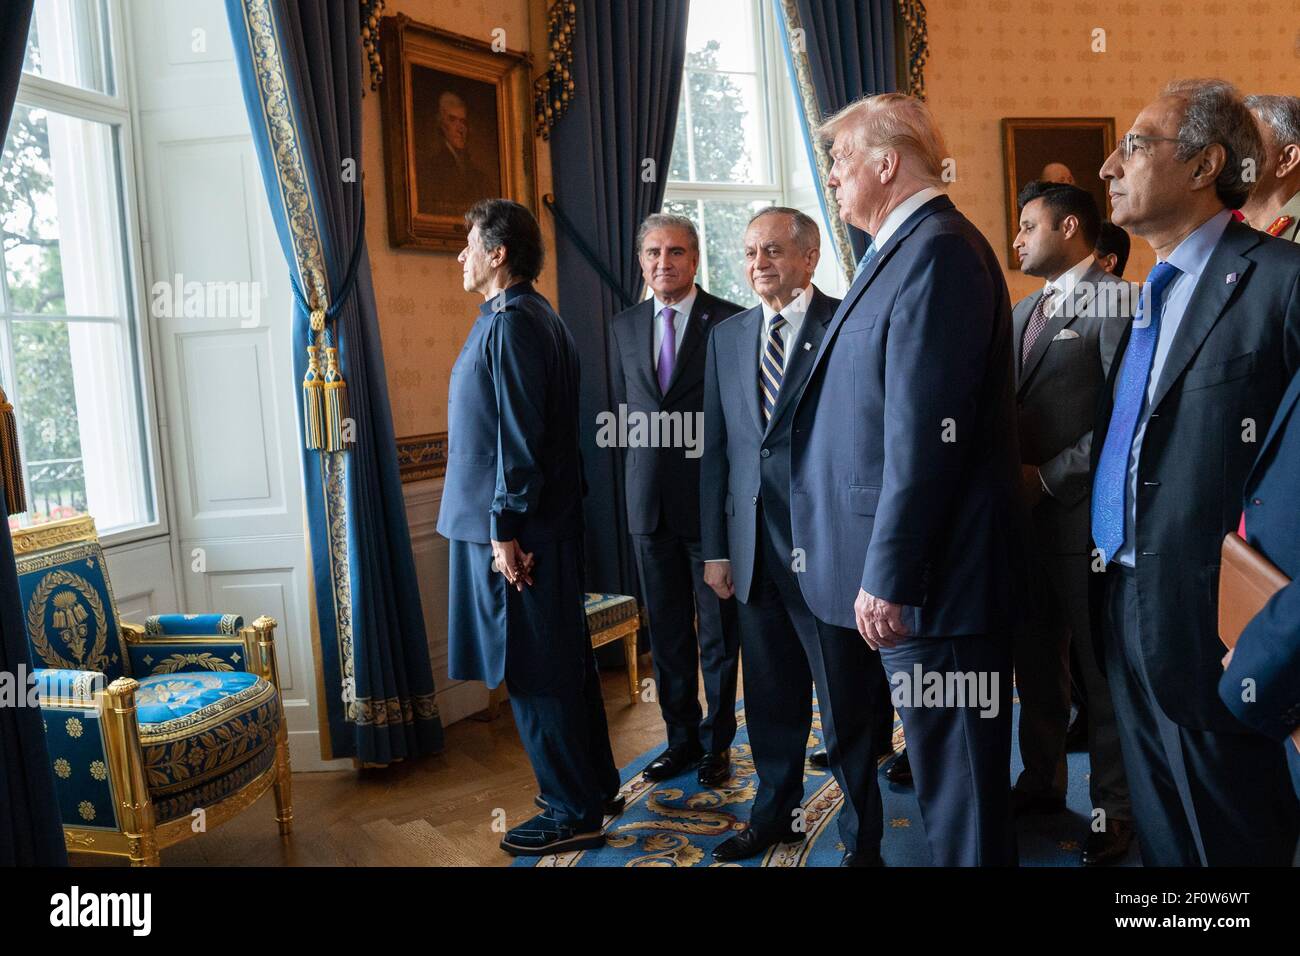 President Donald Trump gives Prime Minister Imran Khan of the Islamic Republic of Pakistan and his delegation a private tour Monday July 22 2019 of the State Floor of the White House in Washington D.C. Stock Photo